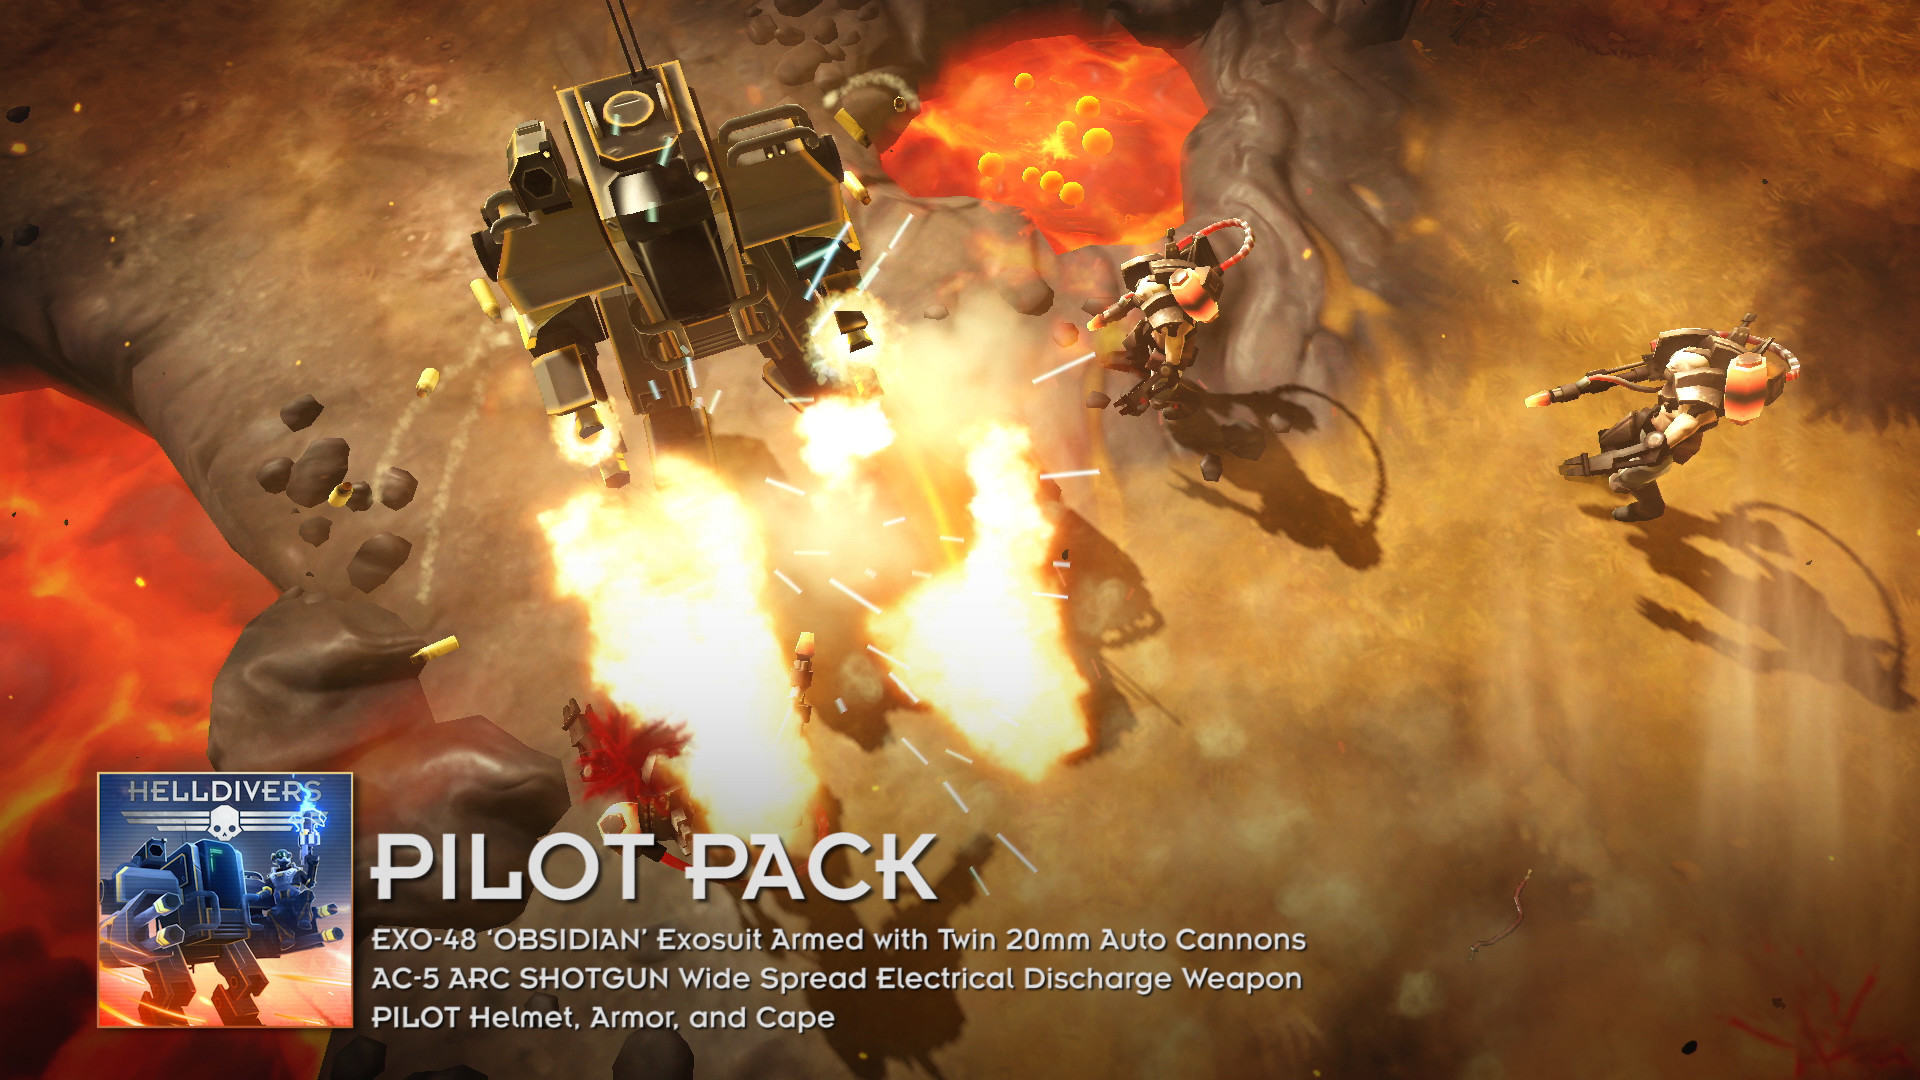 Helldivers game pass. Helldivers Pilot Pack. Helldivers игра. Helldivers 2 пилот. Helldivers support Pack.